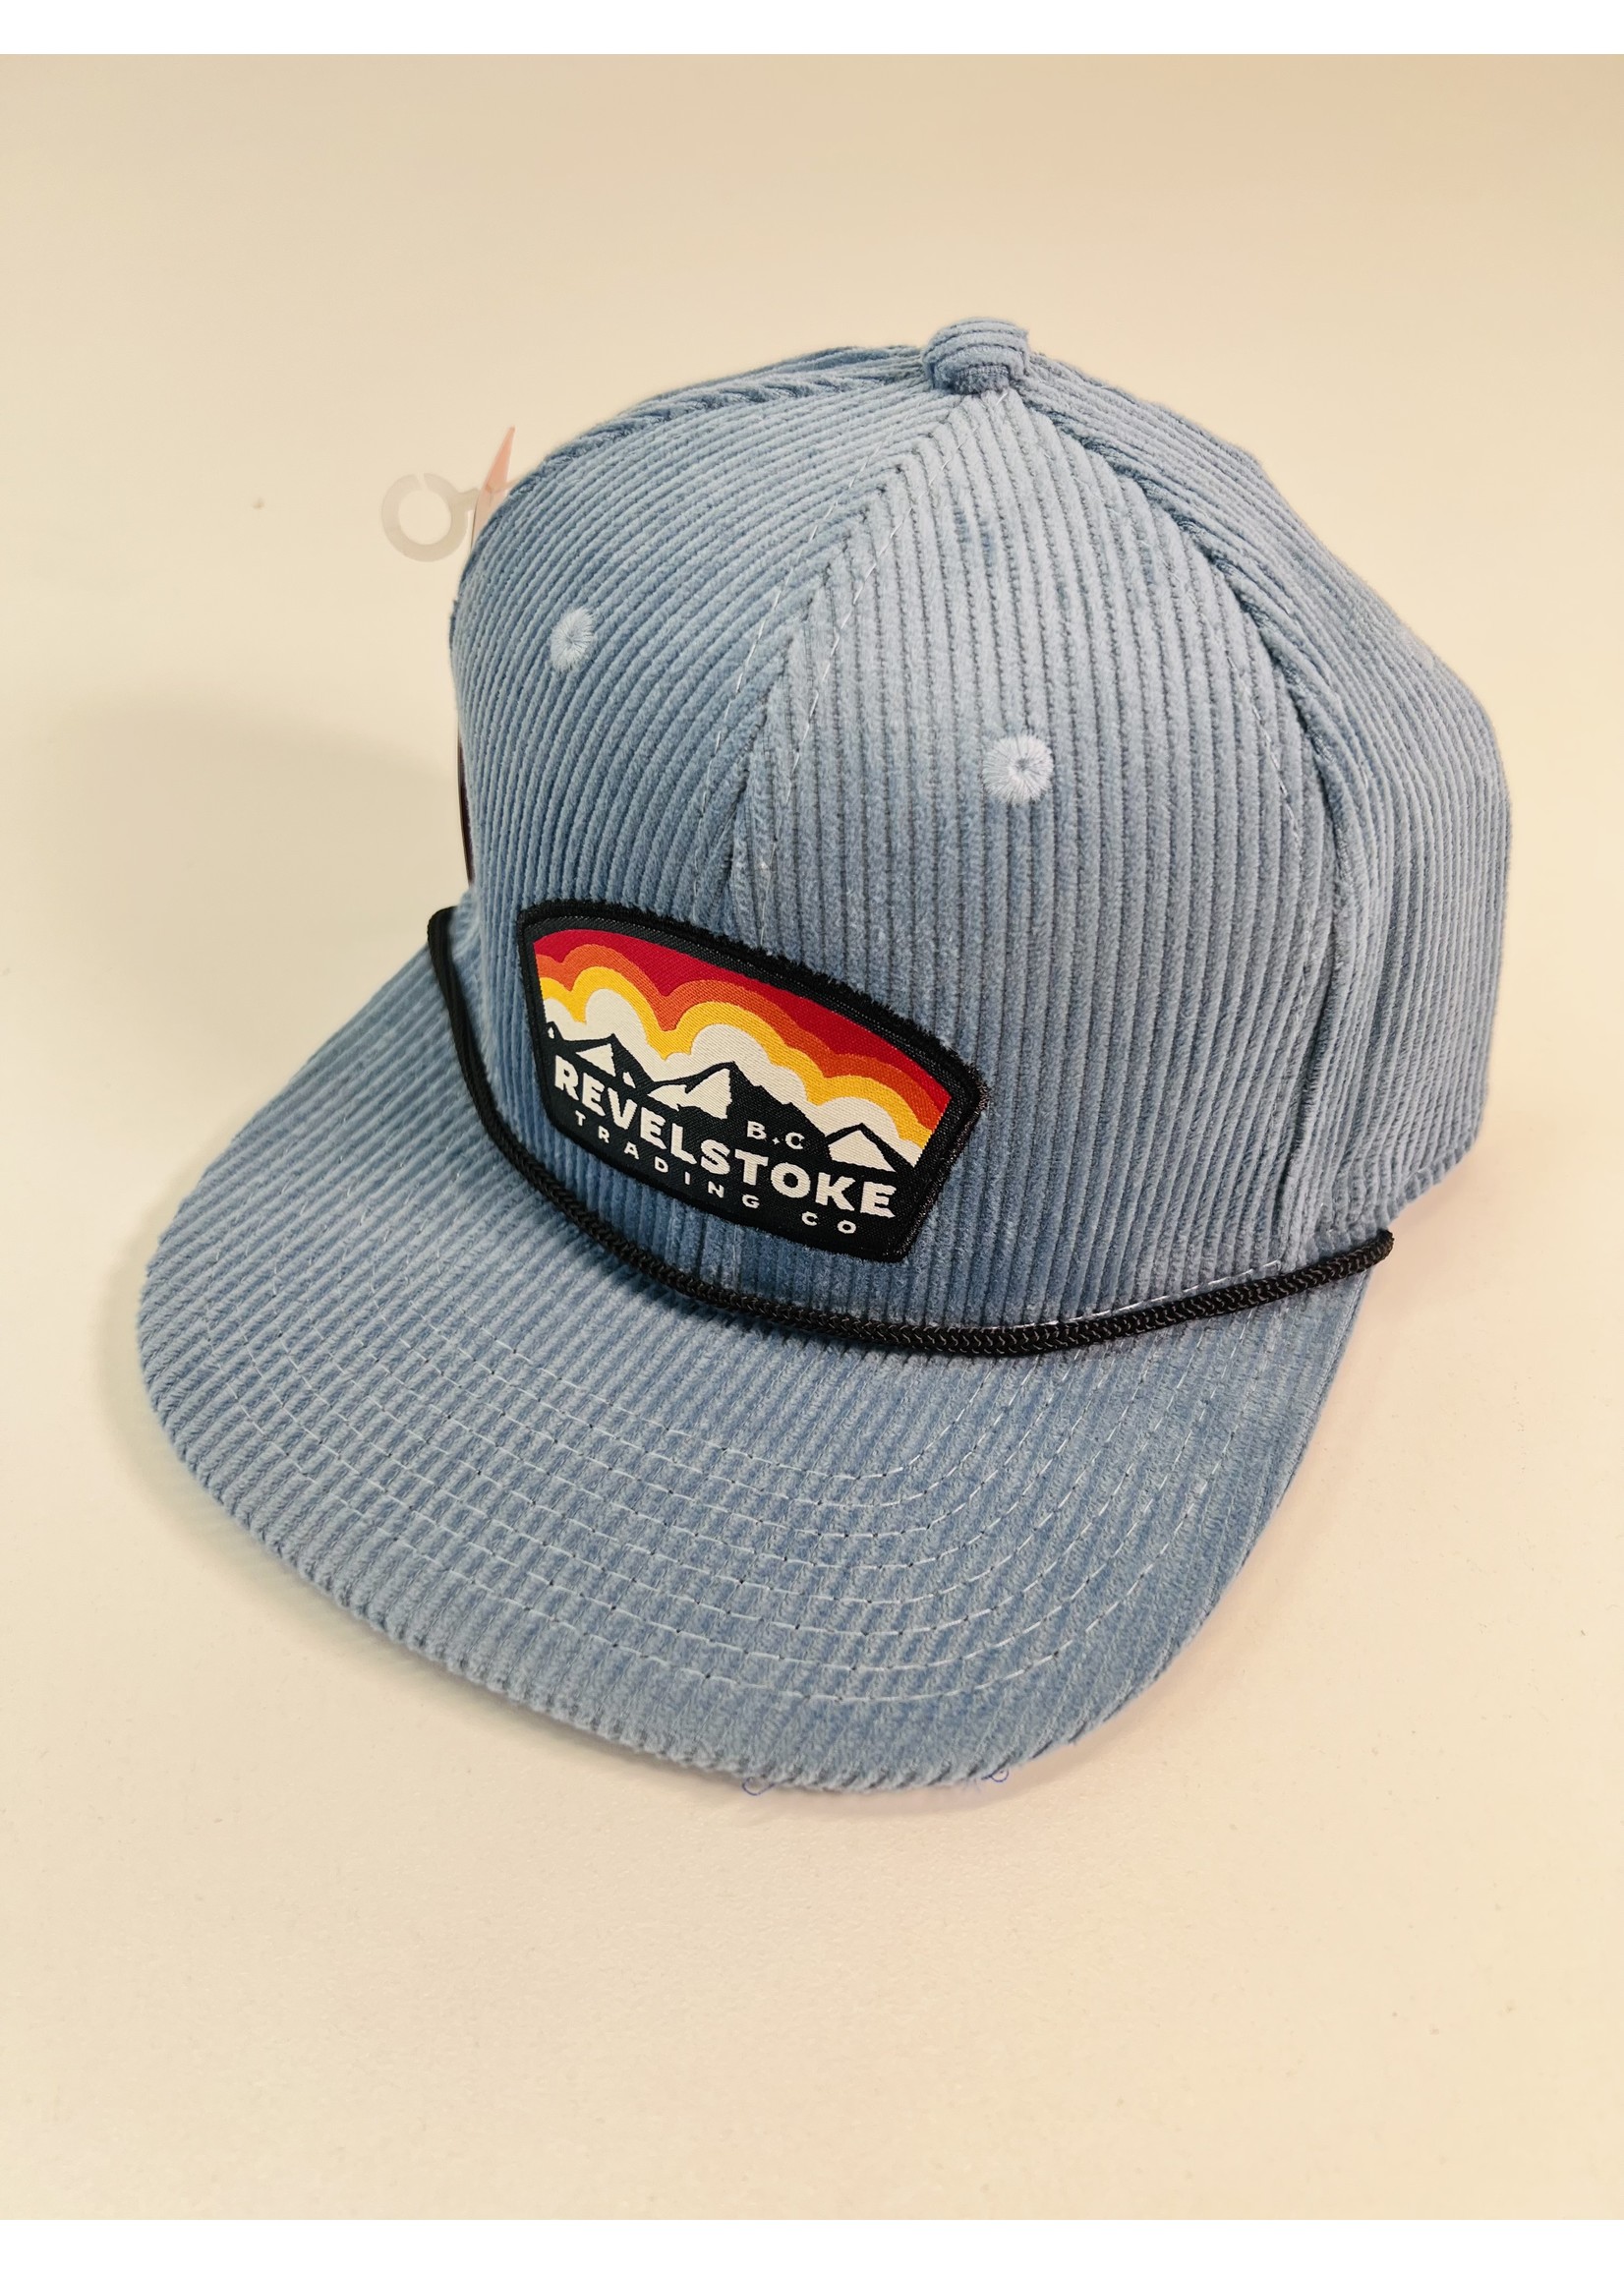 Trading Co. Revelstoke - Clouds Wale Cord Cap (Cadet)